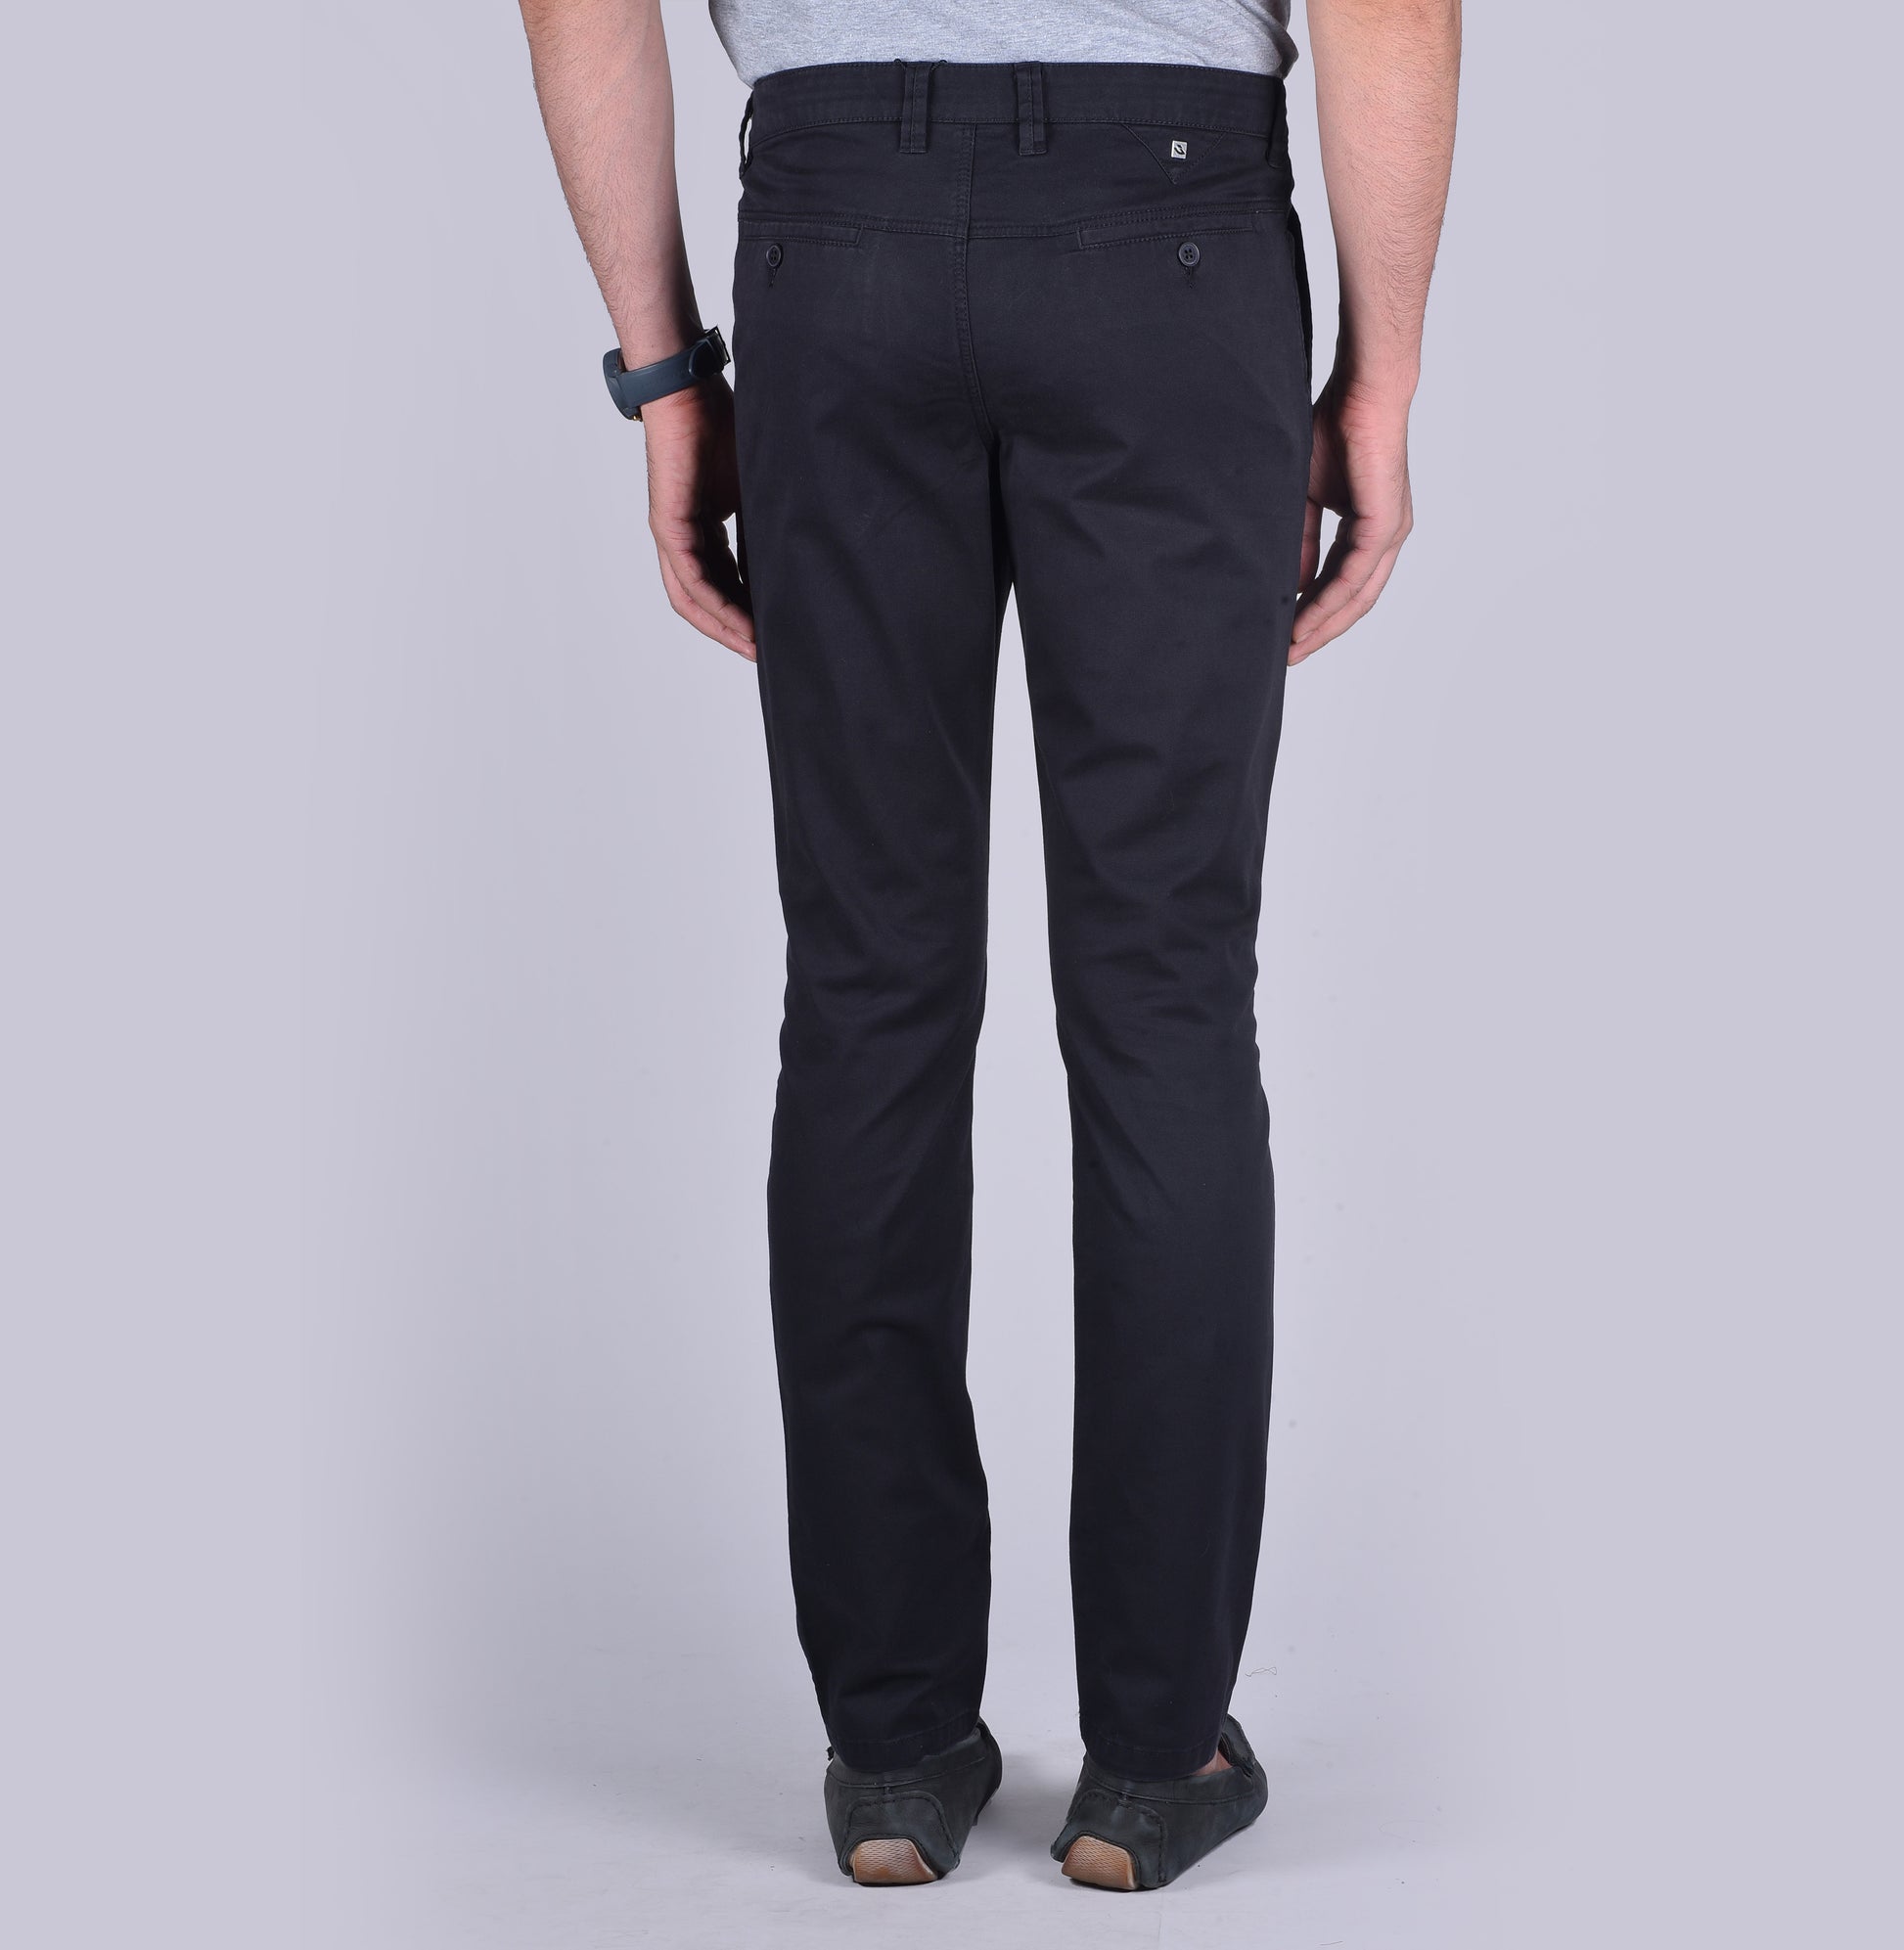 Navy contour fit trousers - urban clothing co.